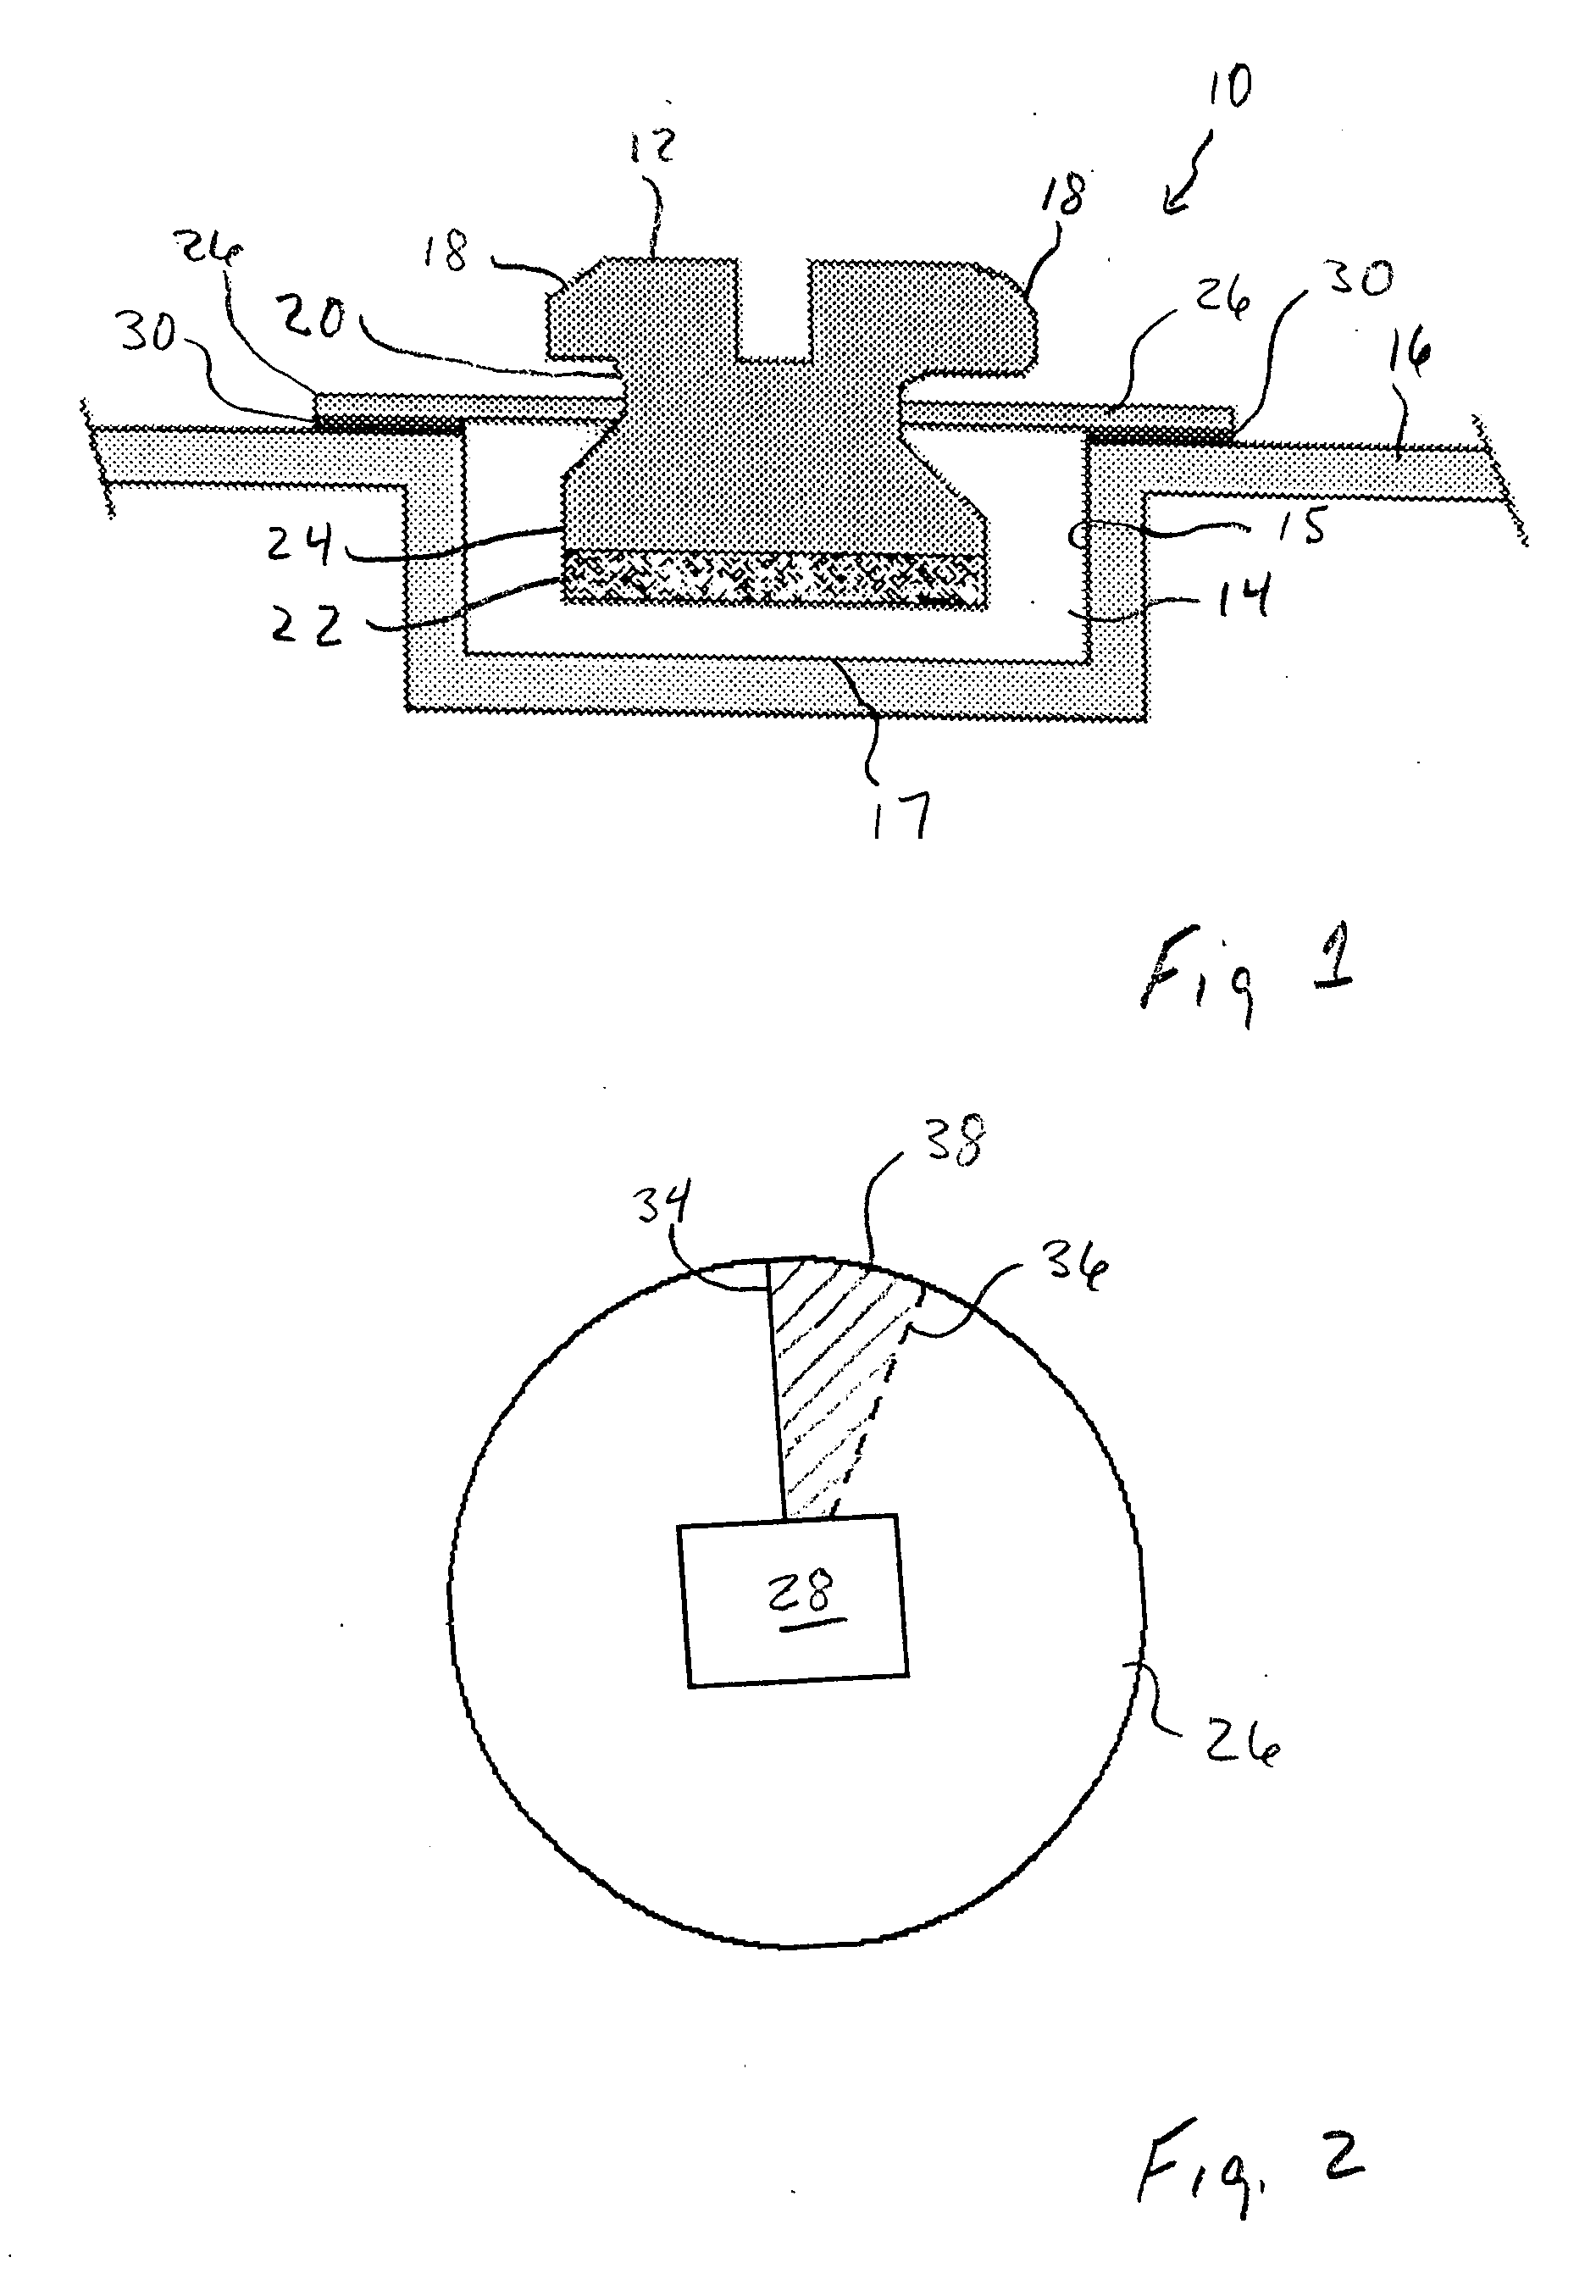 Packaging system for pre-pasted orthodontic bracket